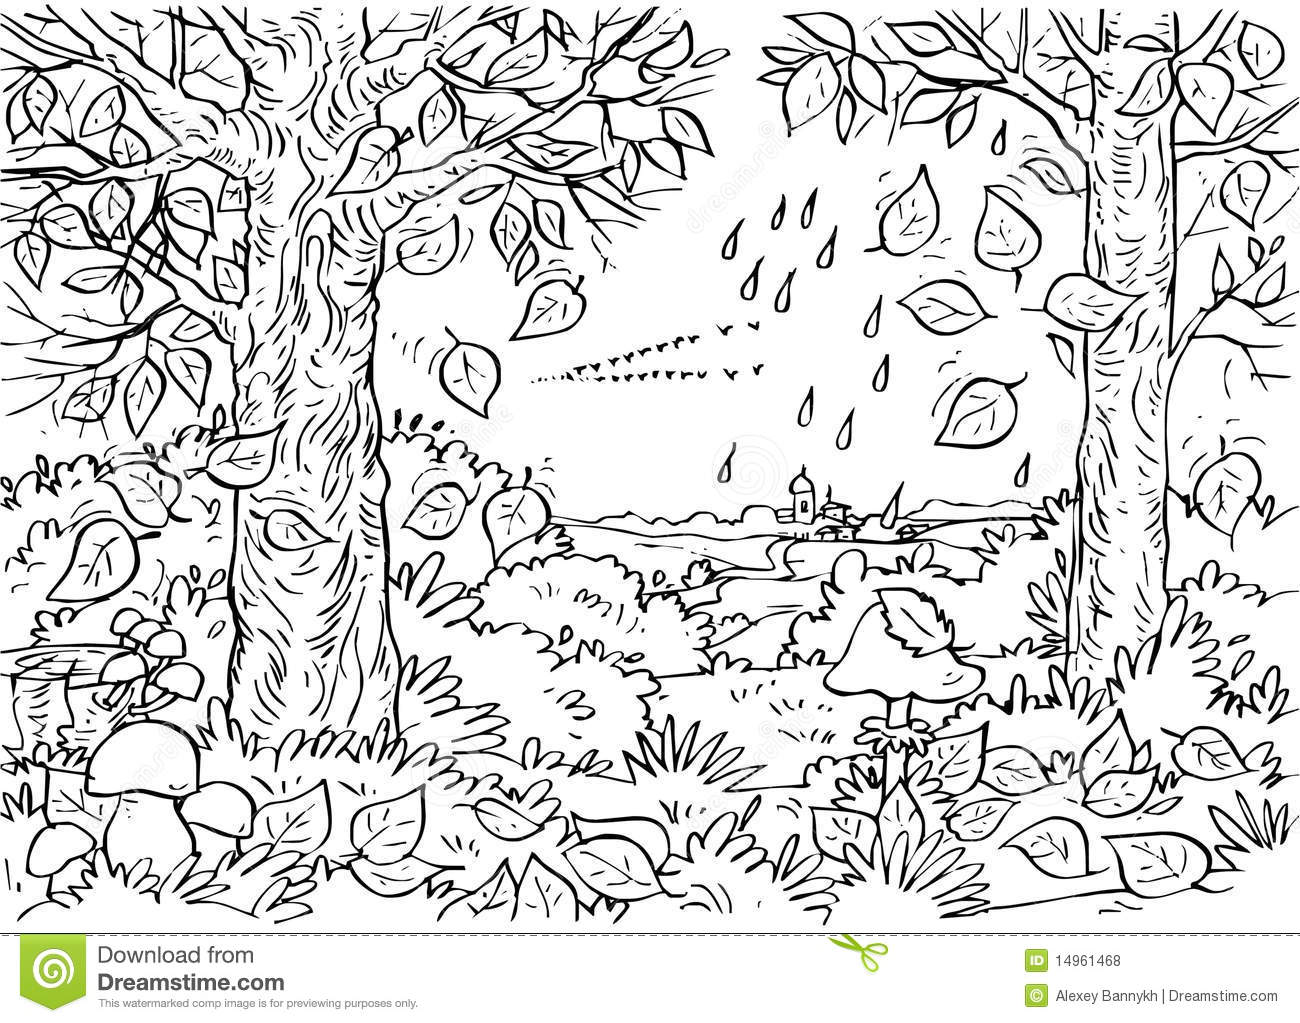 Temperate forest clipart.